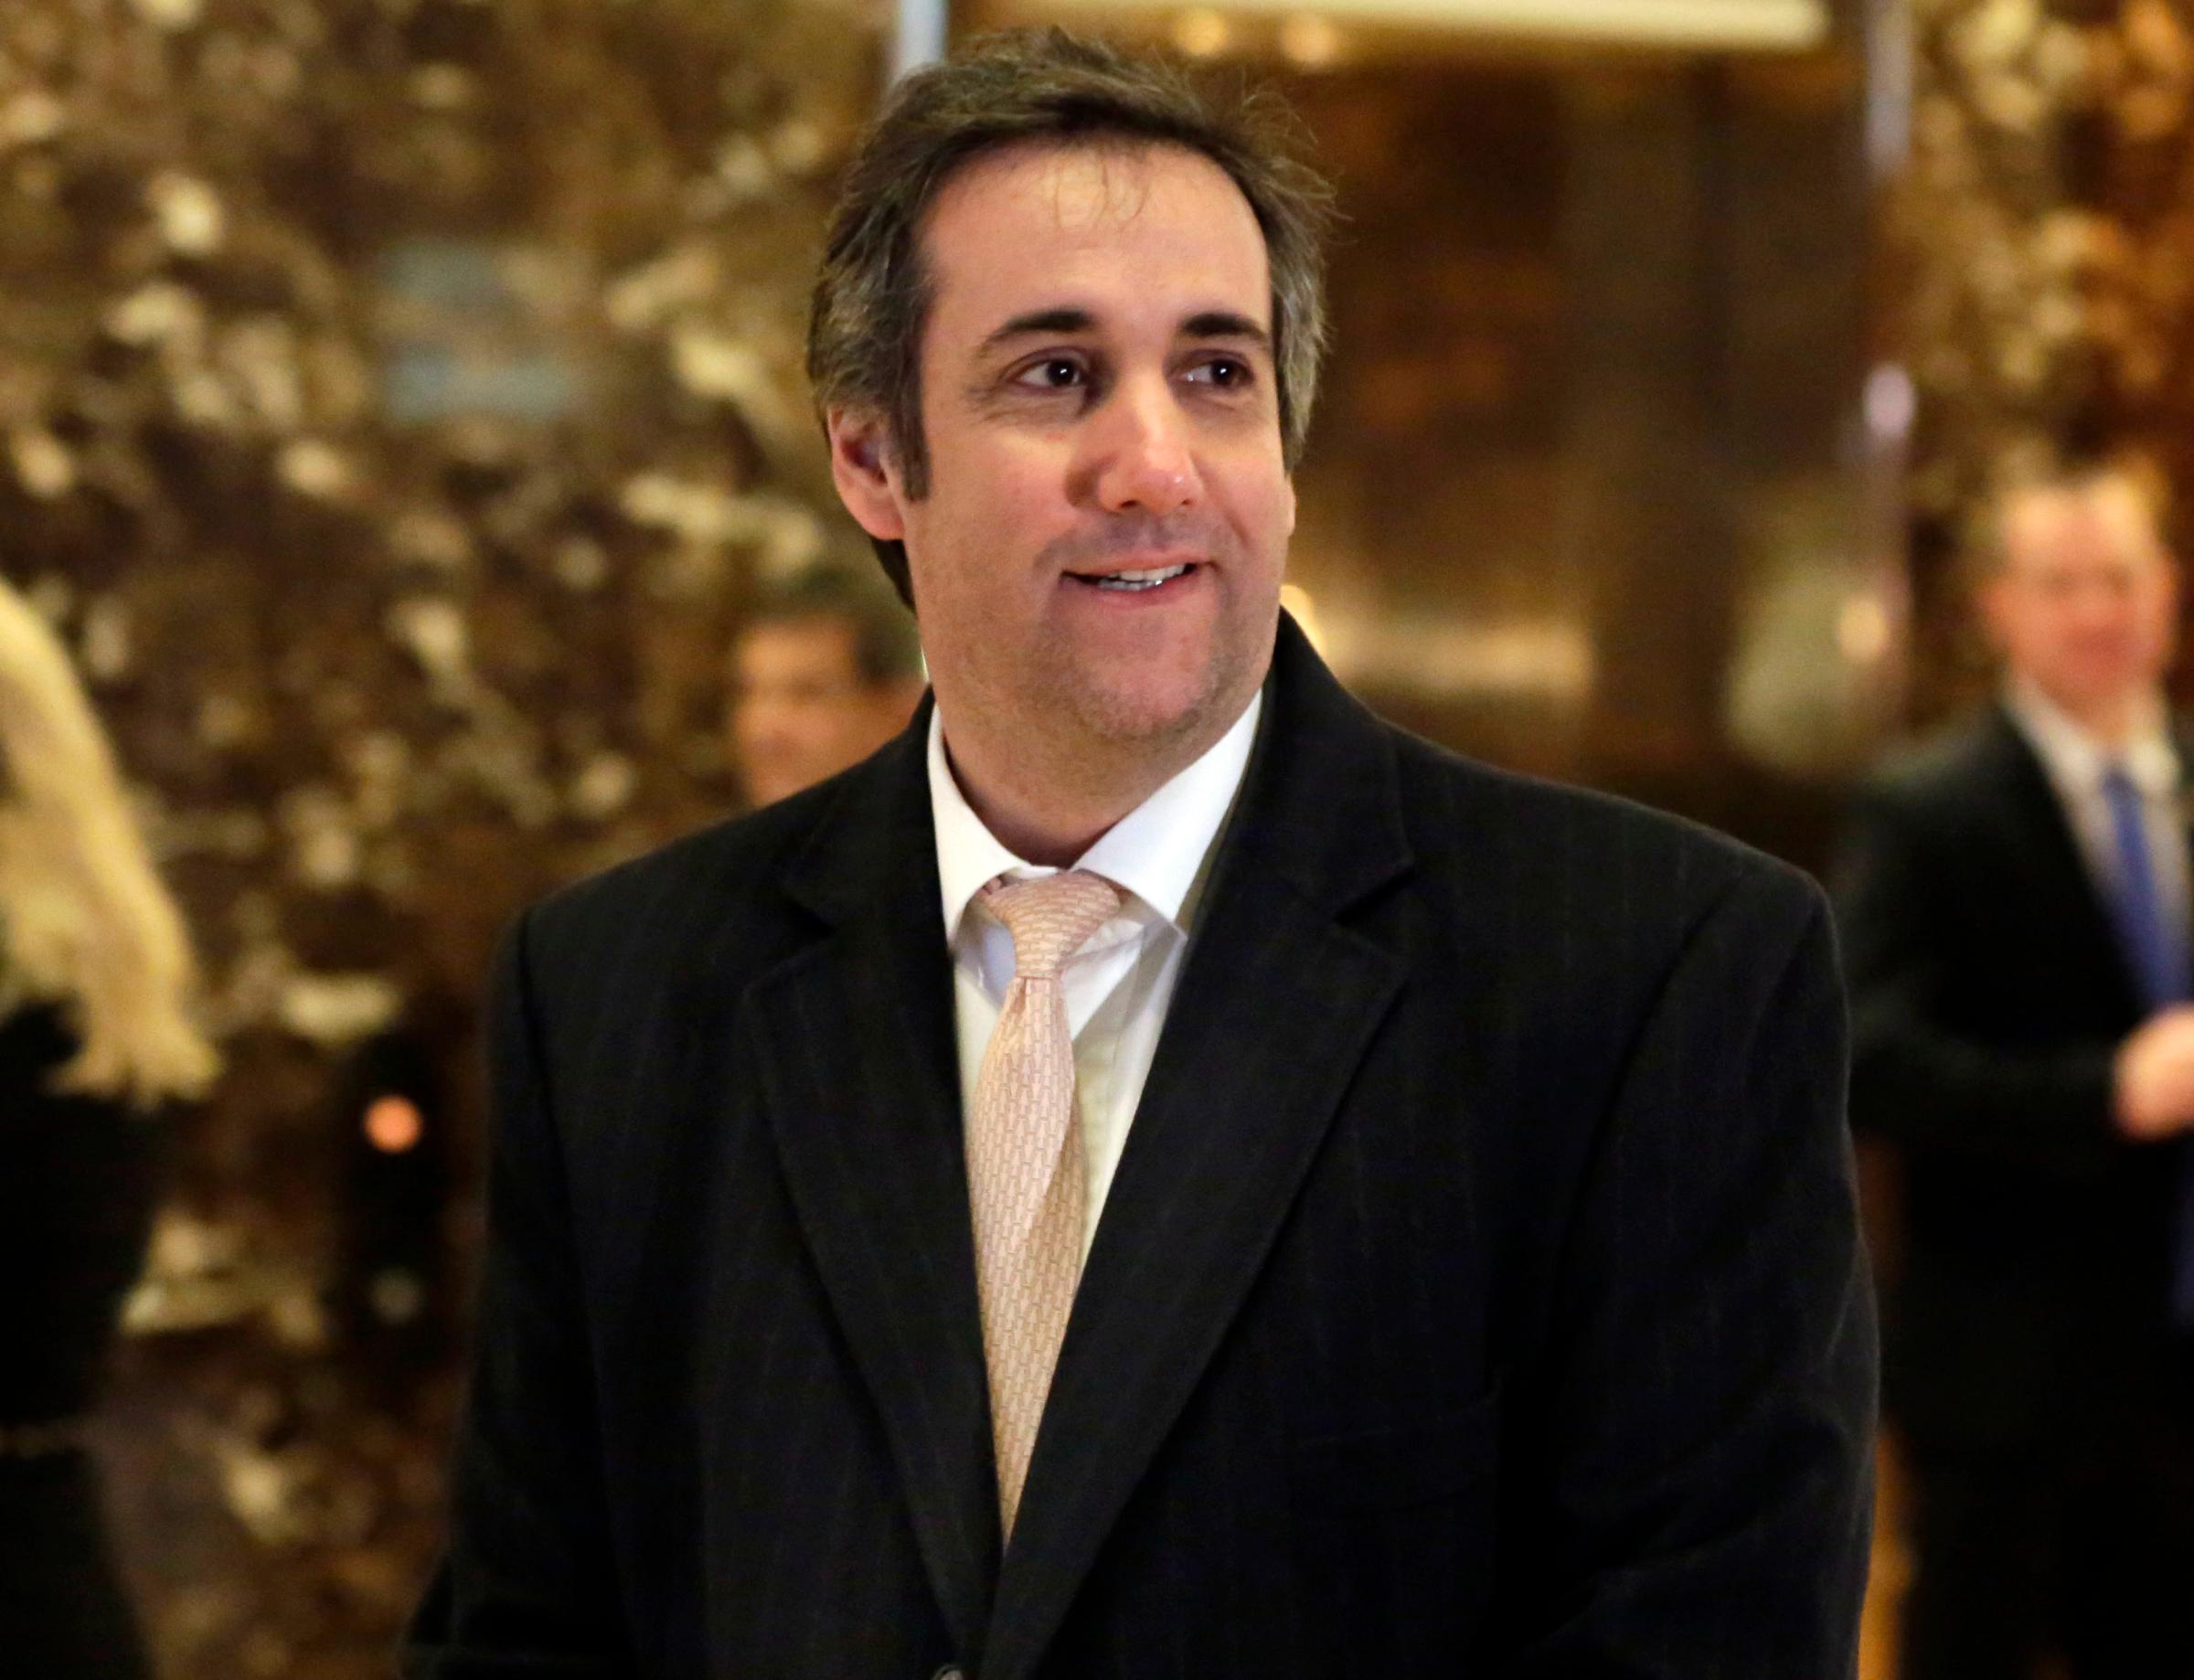 Michael Cohen, an attorney for Donald Trump, arrives in Trump Tower in New York on Dec. 16, 2016.